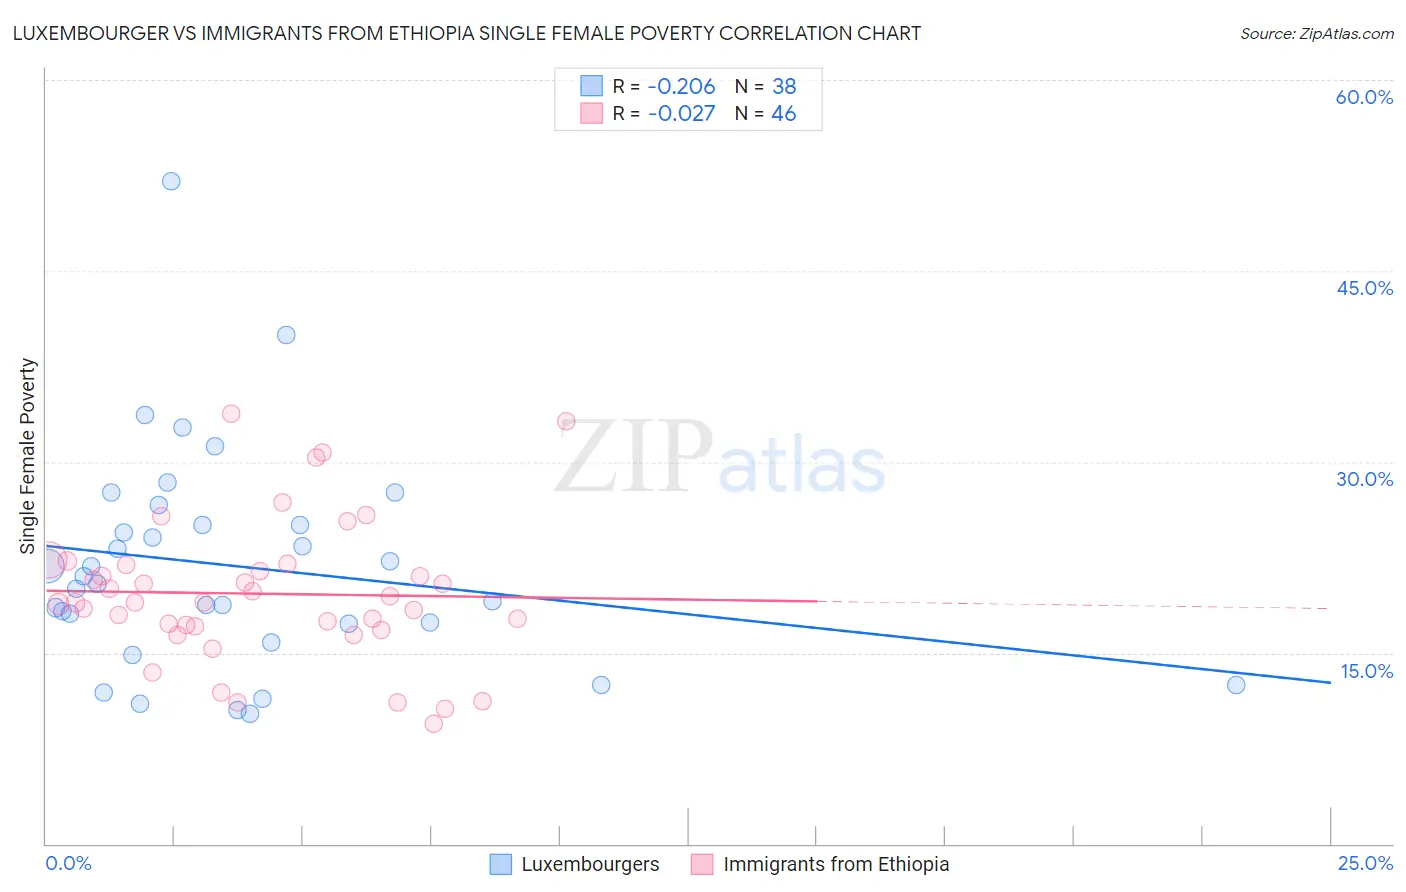 Luxembourger vs Immigrants from Ethiopia Single Female Poverty